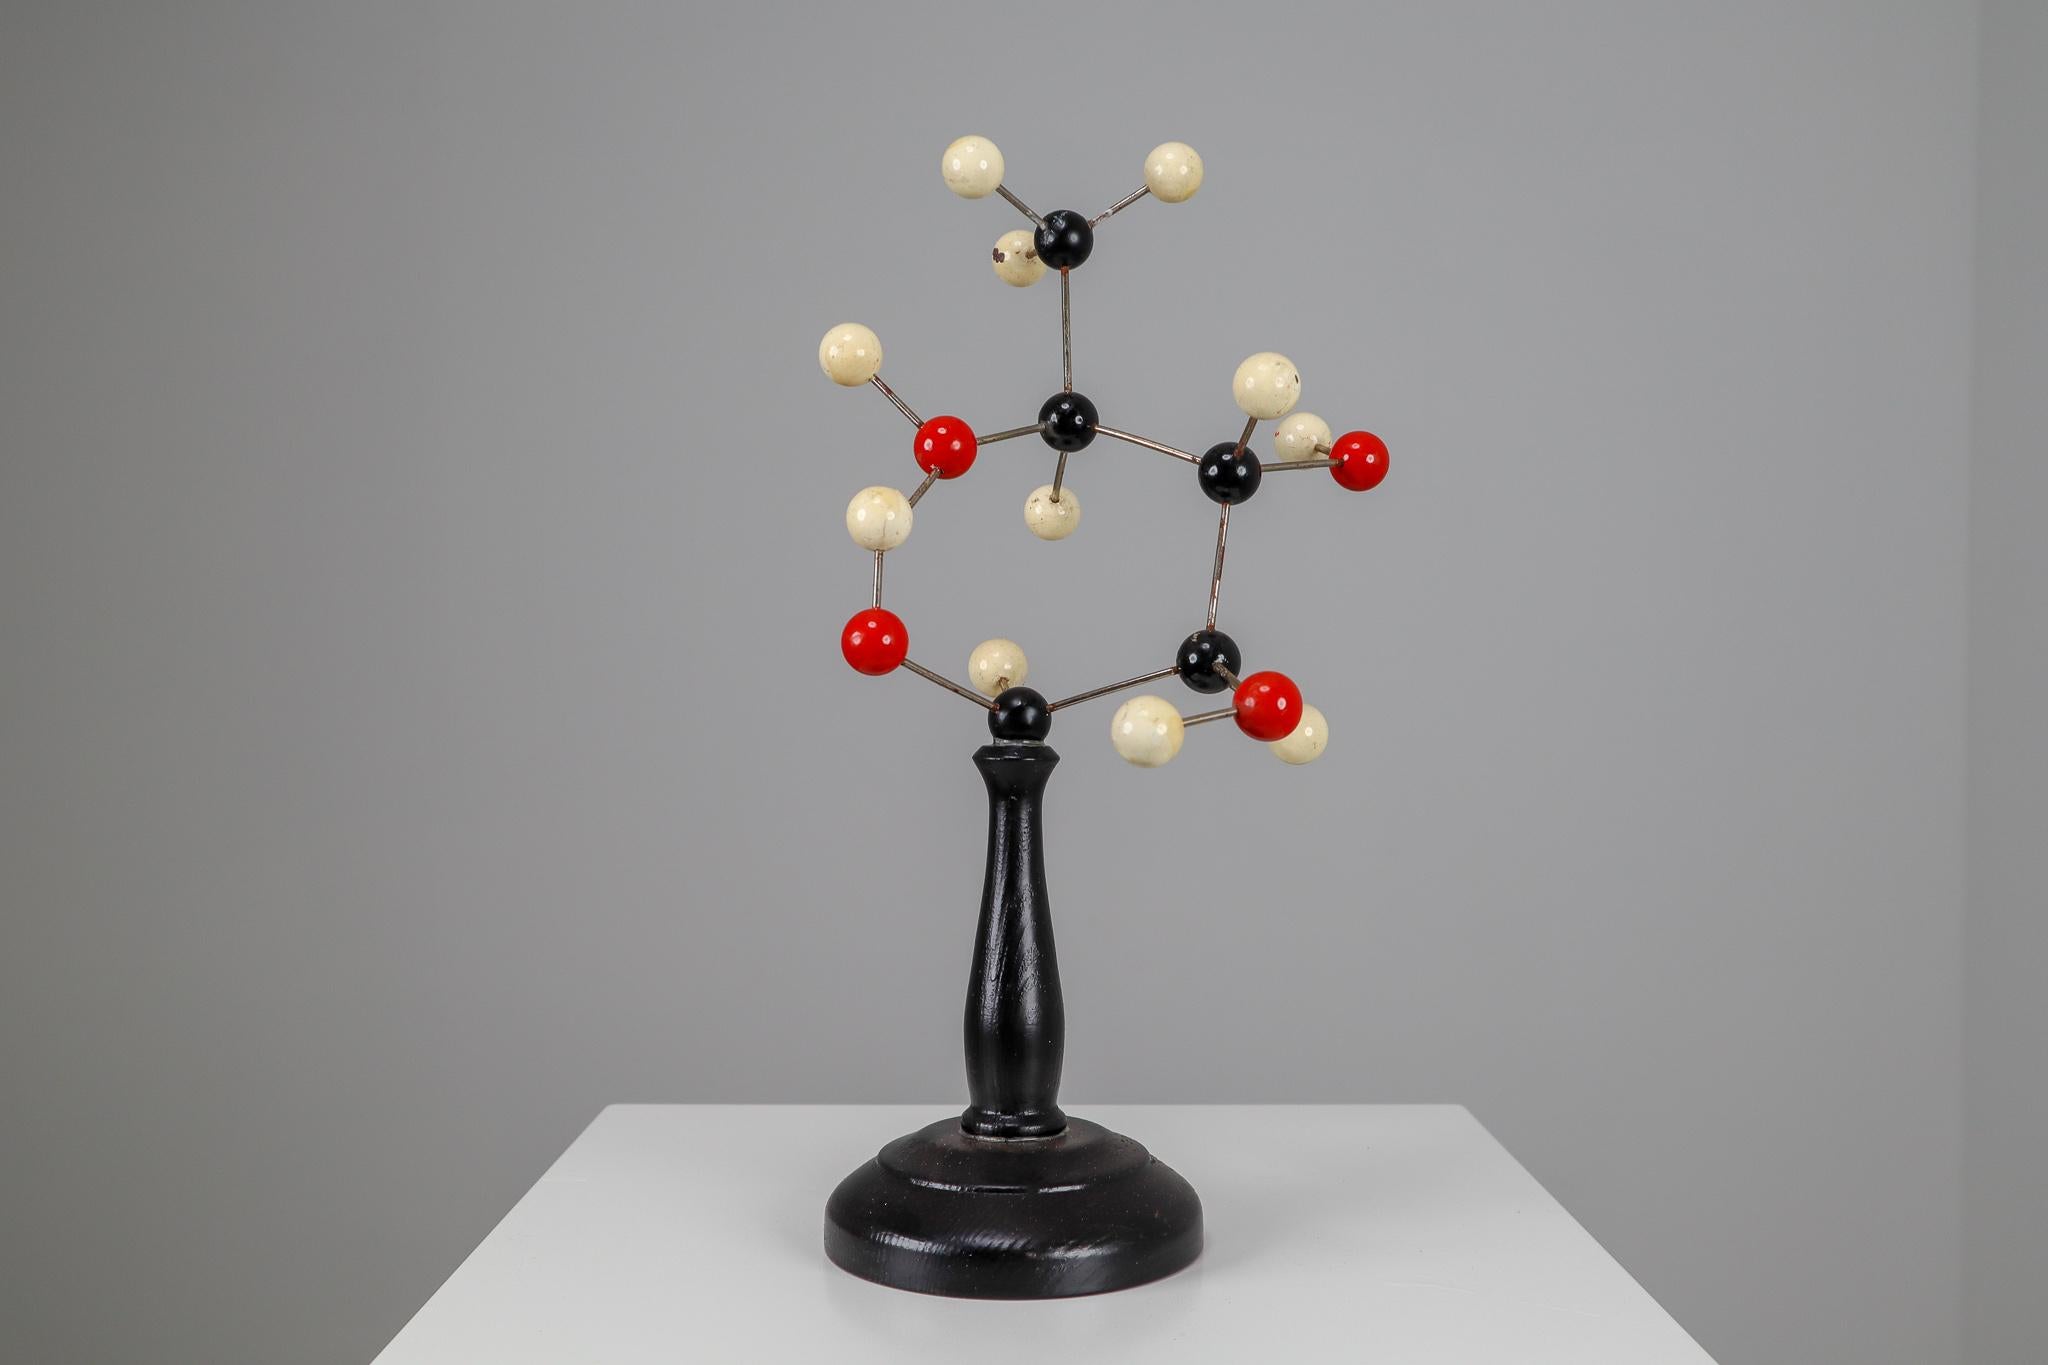 Midcentury decorative scientific molecular model from Czechoslovakia from the 1960s. Made for educational reasons, used for classroom demonstration and study. In good condition with signs of age and patina.